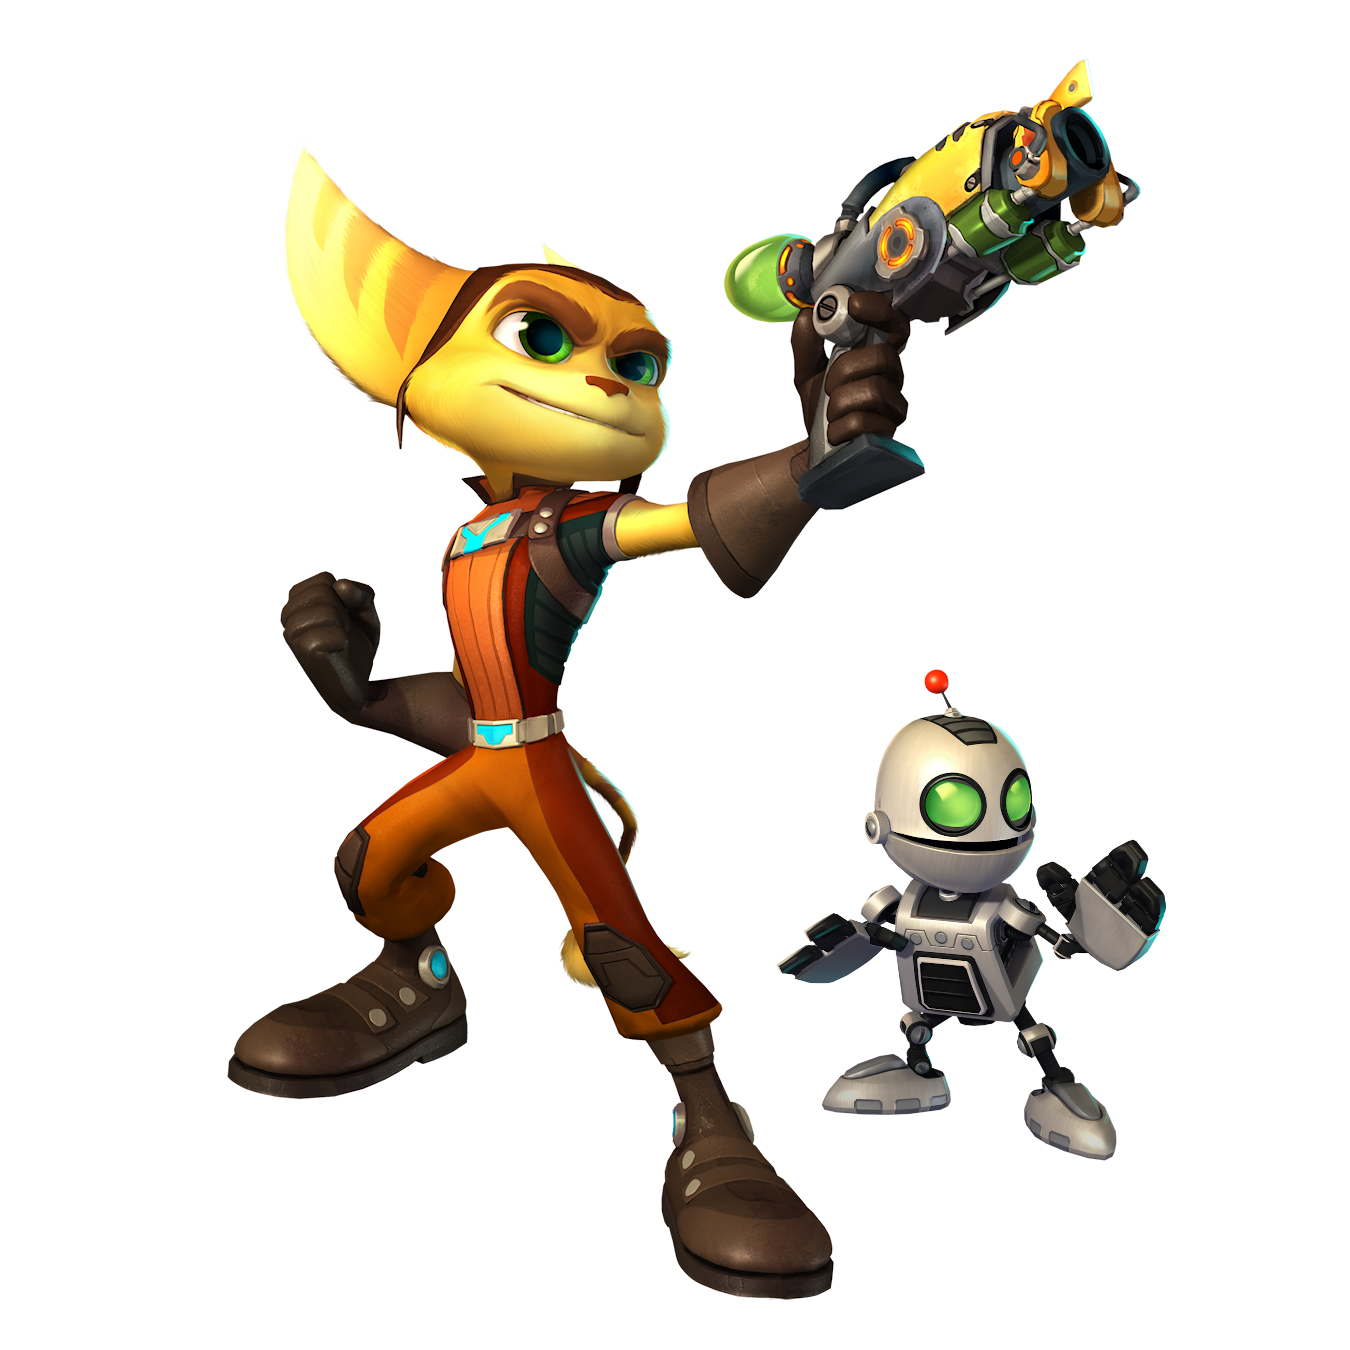 Download Ratchet Clank PNG im